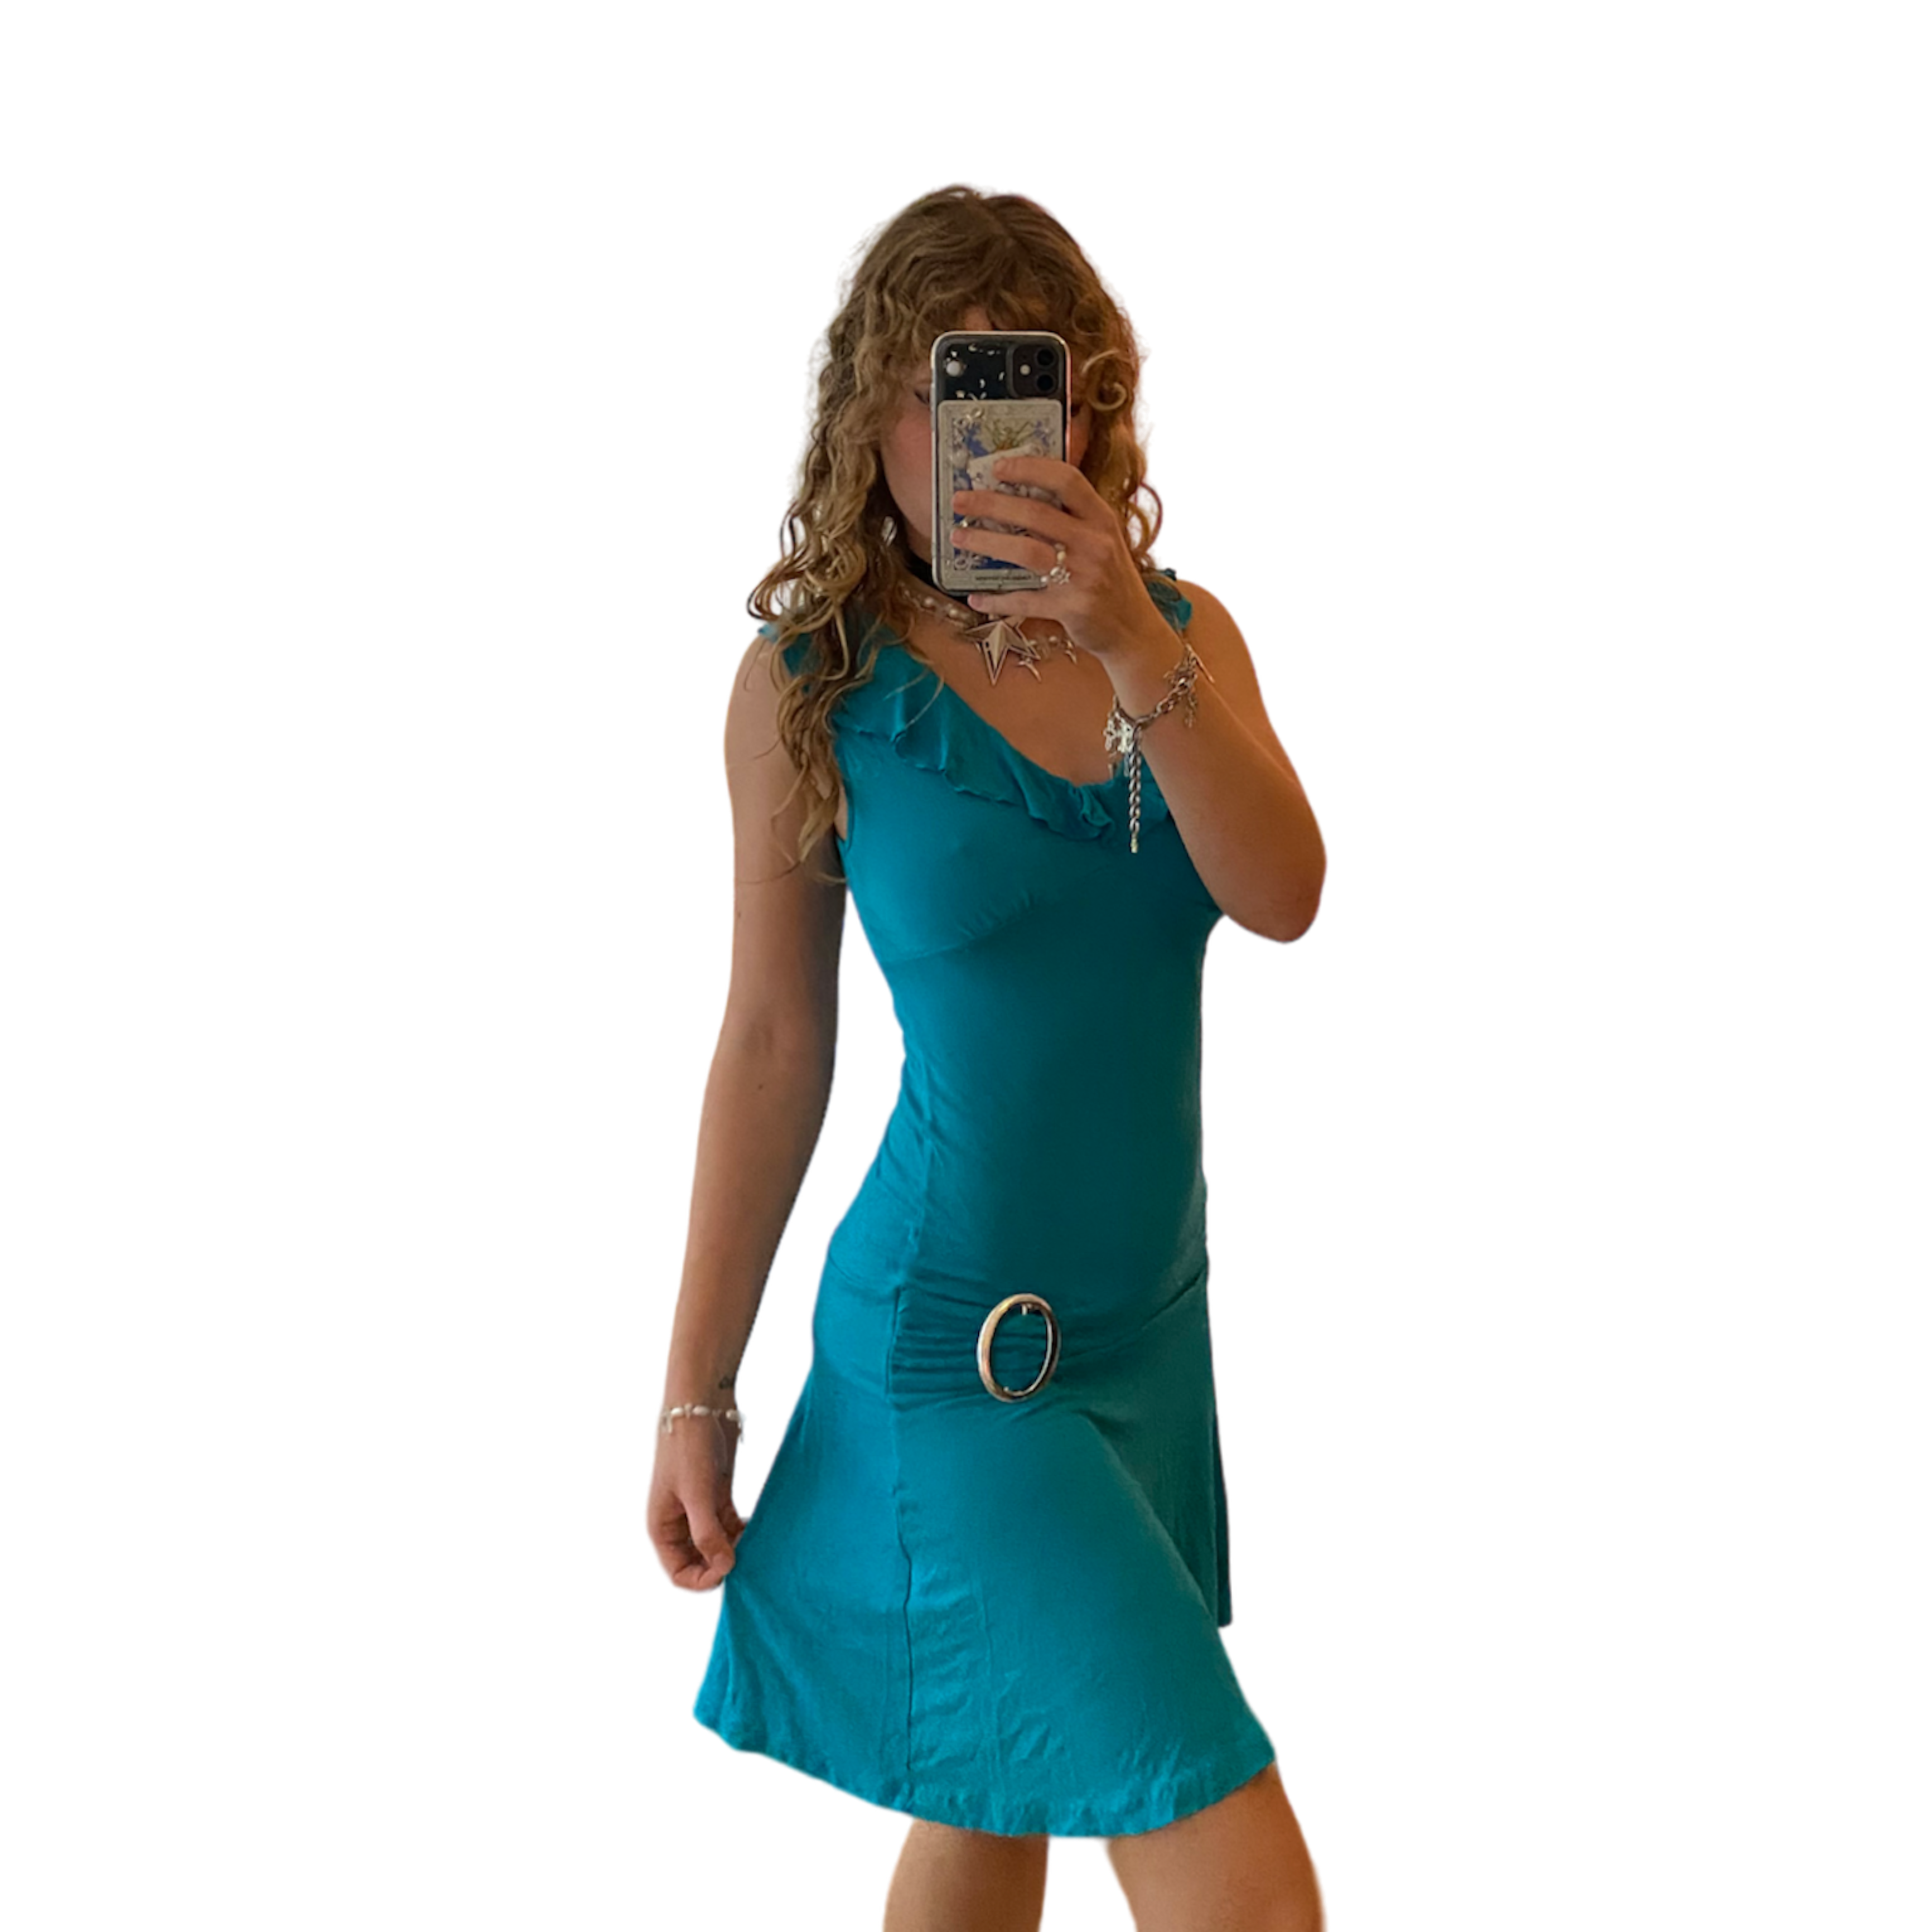 2000's Turquoise Dress with Belt